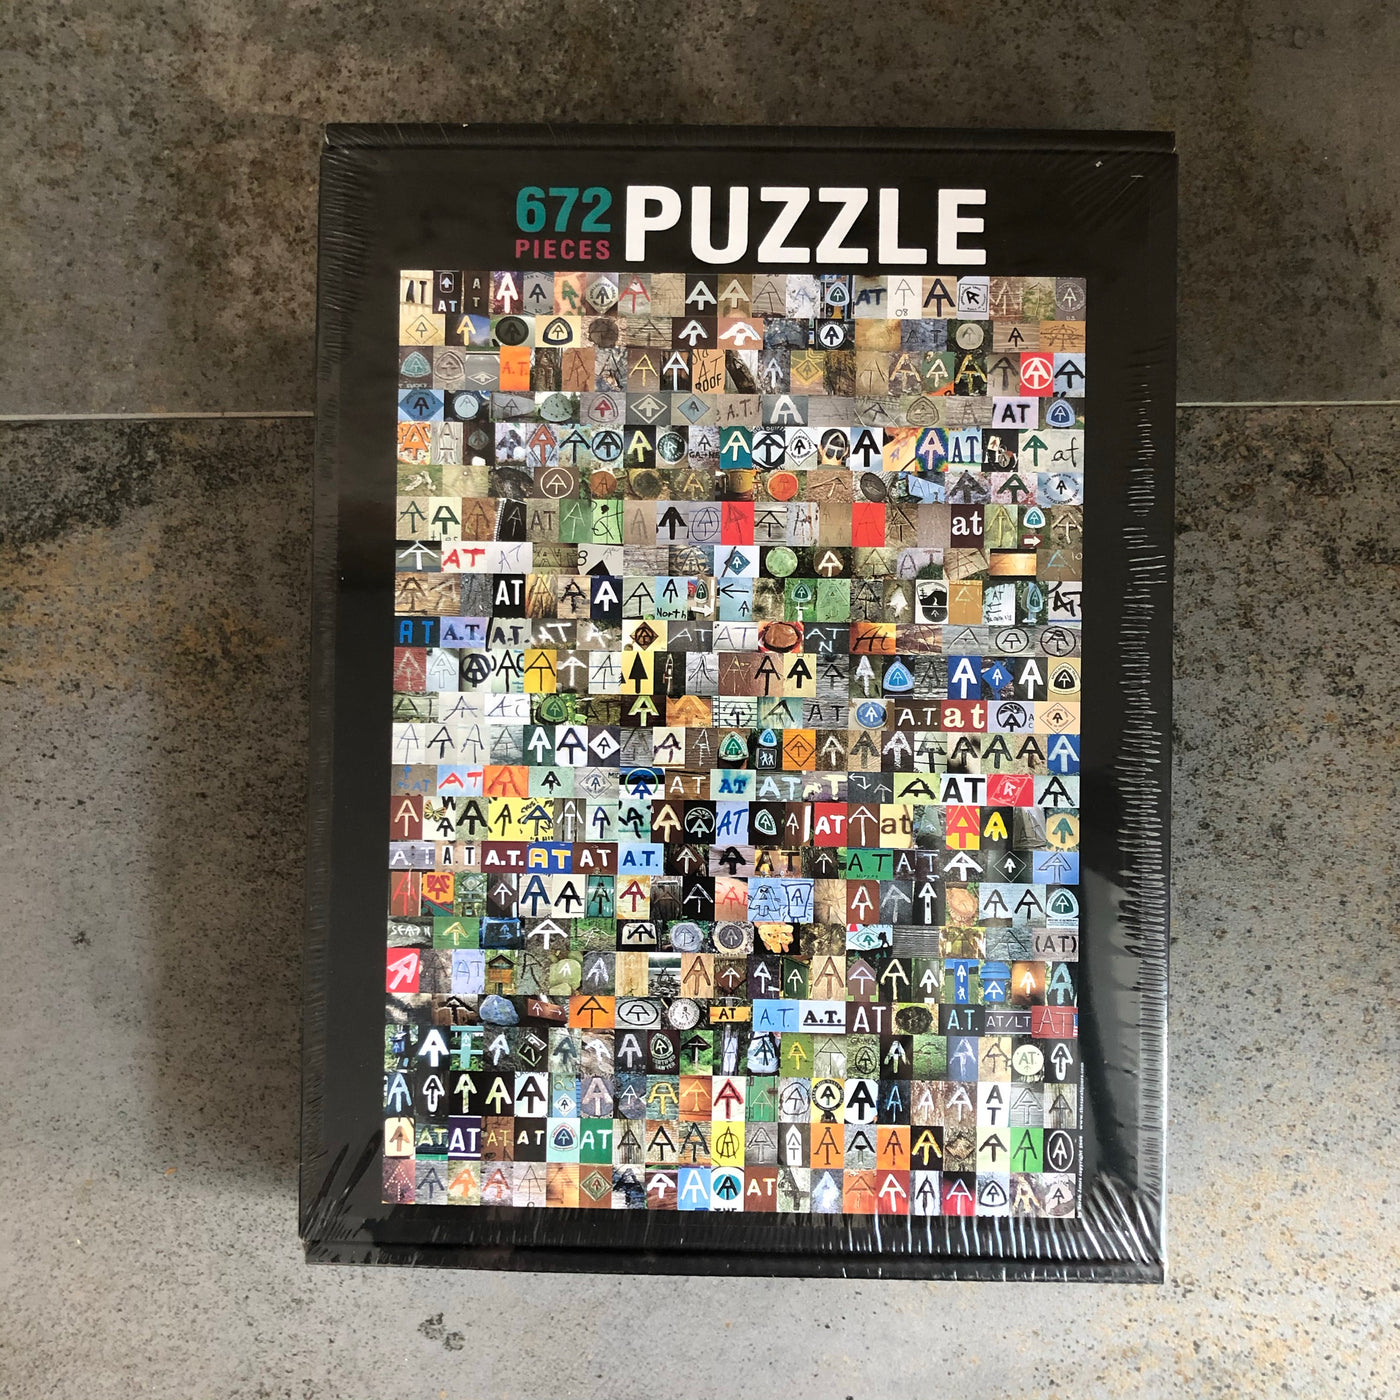 The AT Poster Puzzle by Sarah Jones Decker, 672 Pieces